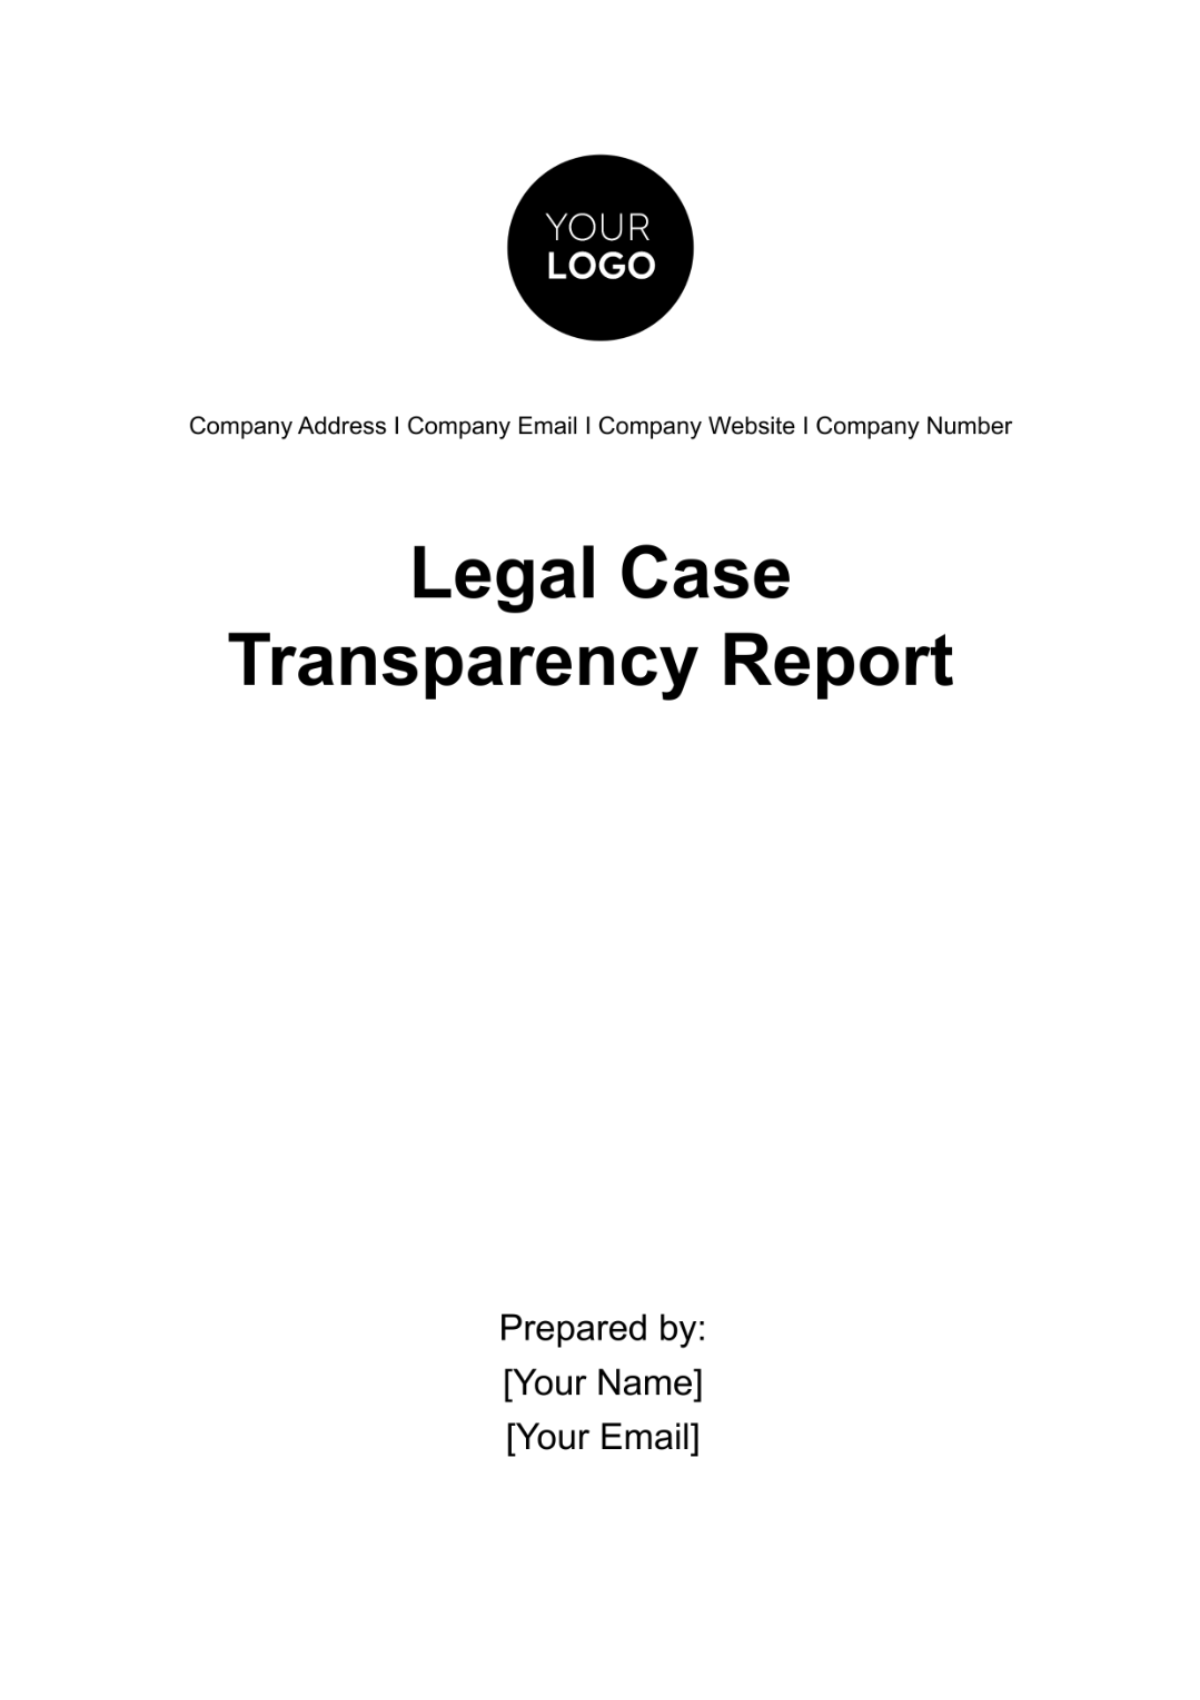 Legal Case Transparency Report Template